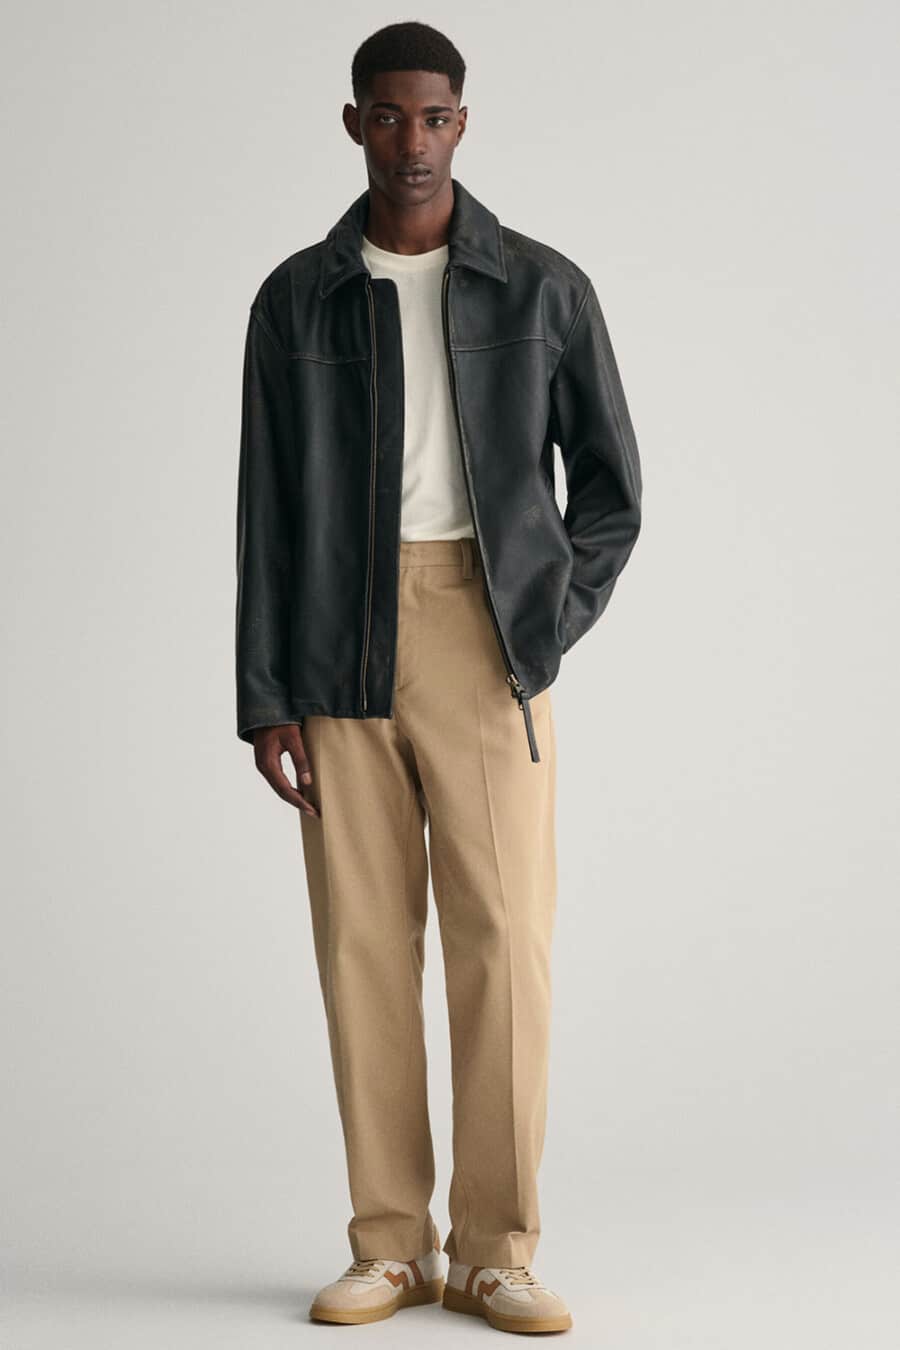 Men's wide leg kahki pants, tucked in white T-shirt, black collared leather jacket and beige/brown suede gum sole sneakers outfit